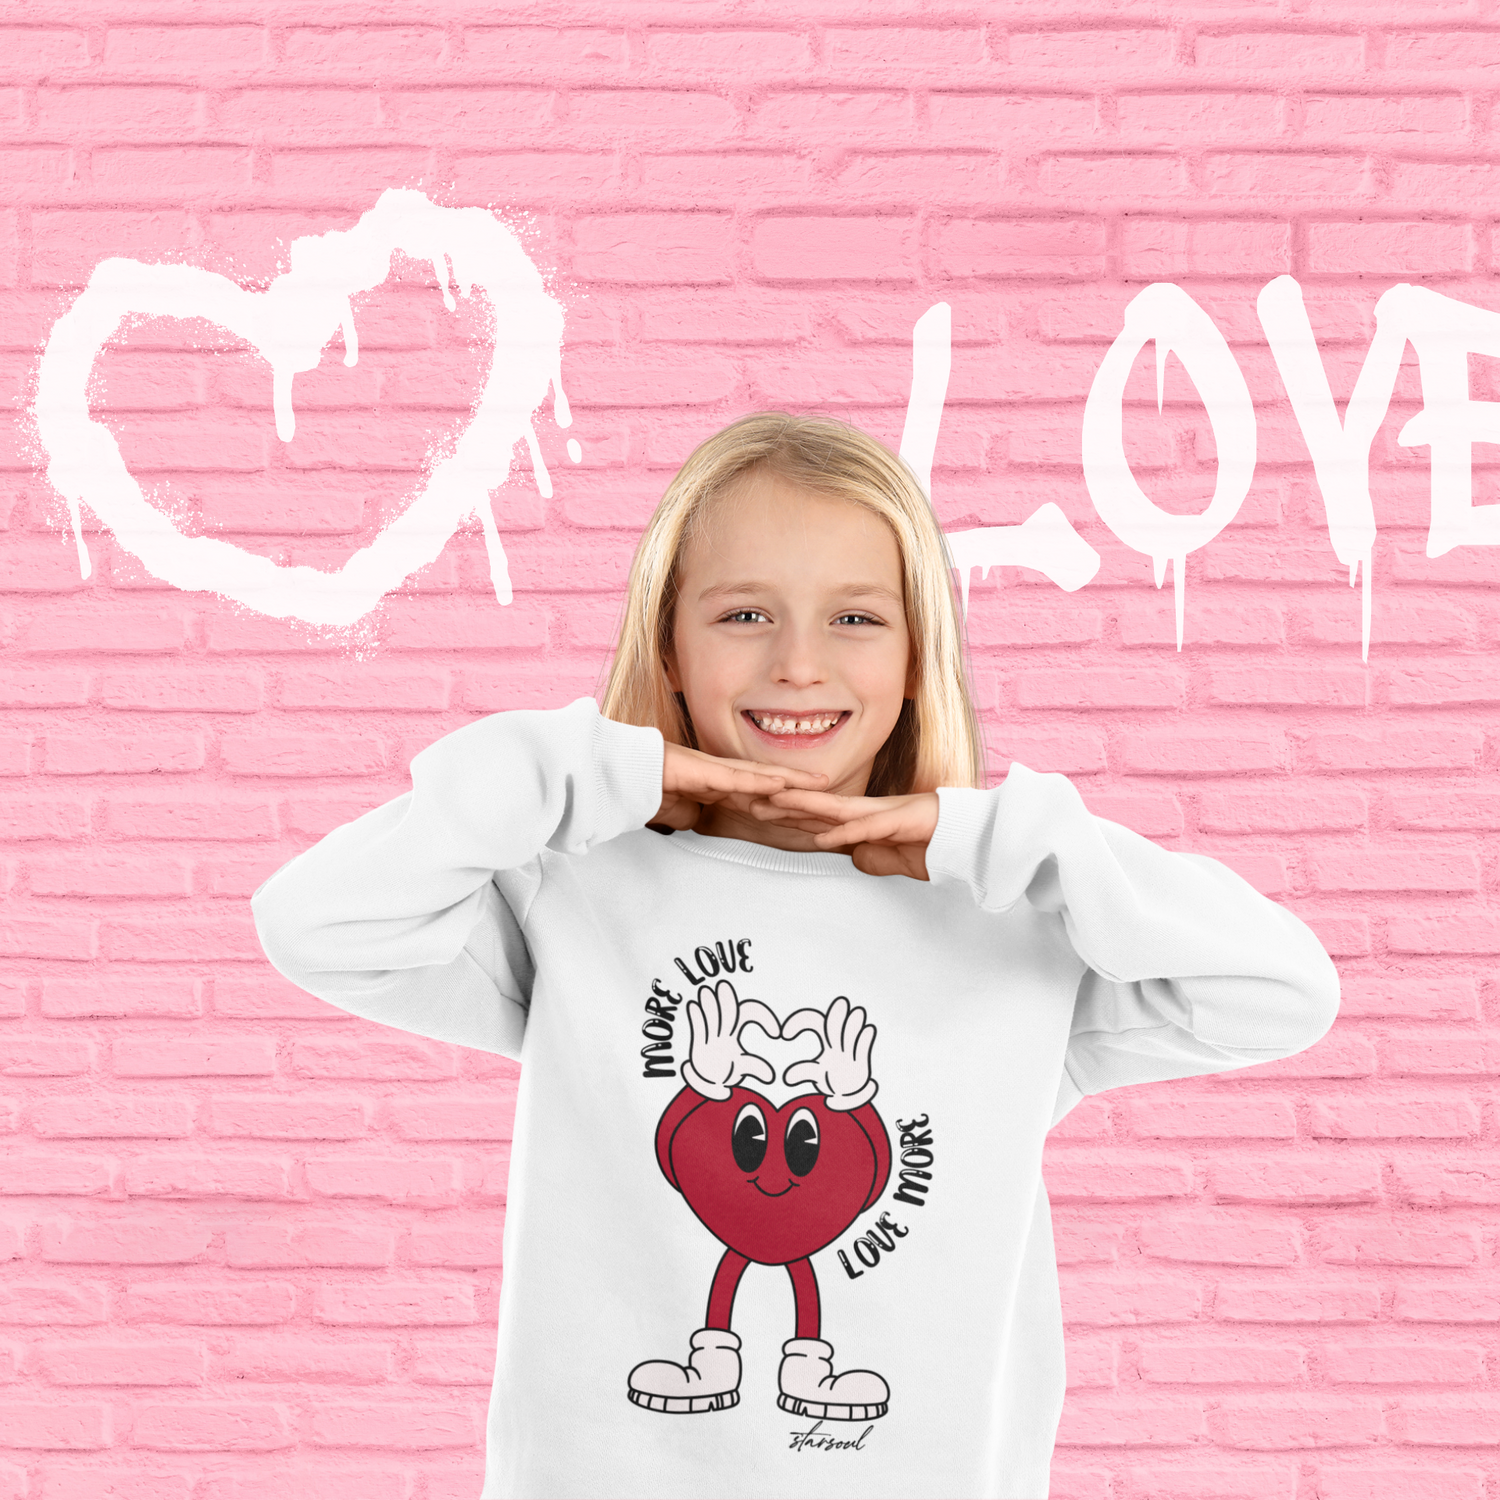 white sweatshirt with heart character "more love" "love more" design benefitting heart disease